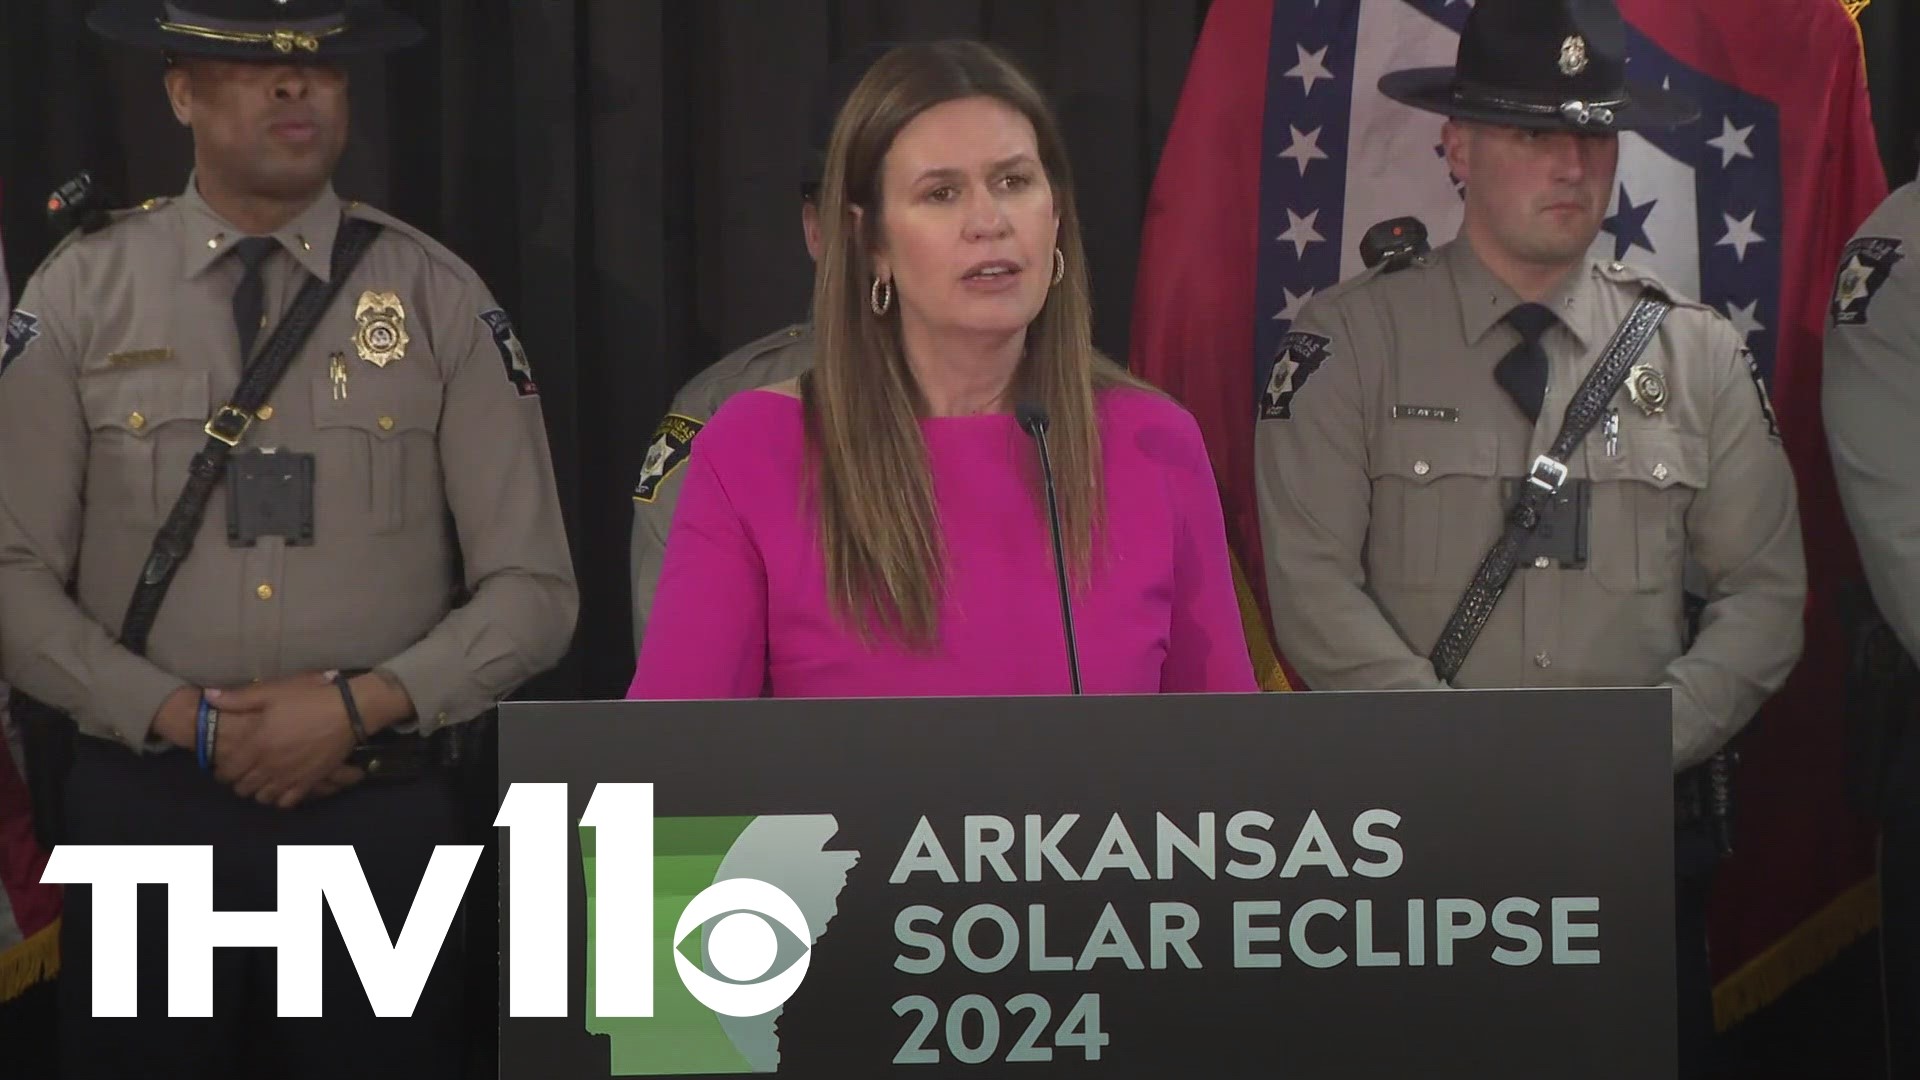 On Monday, government leaders in Arkansas all came together to showcase their plans as they prepare for a smooth total solar eclipse on April 8.